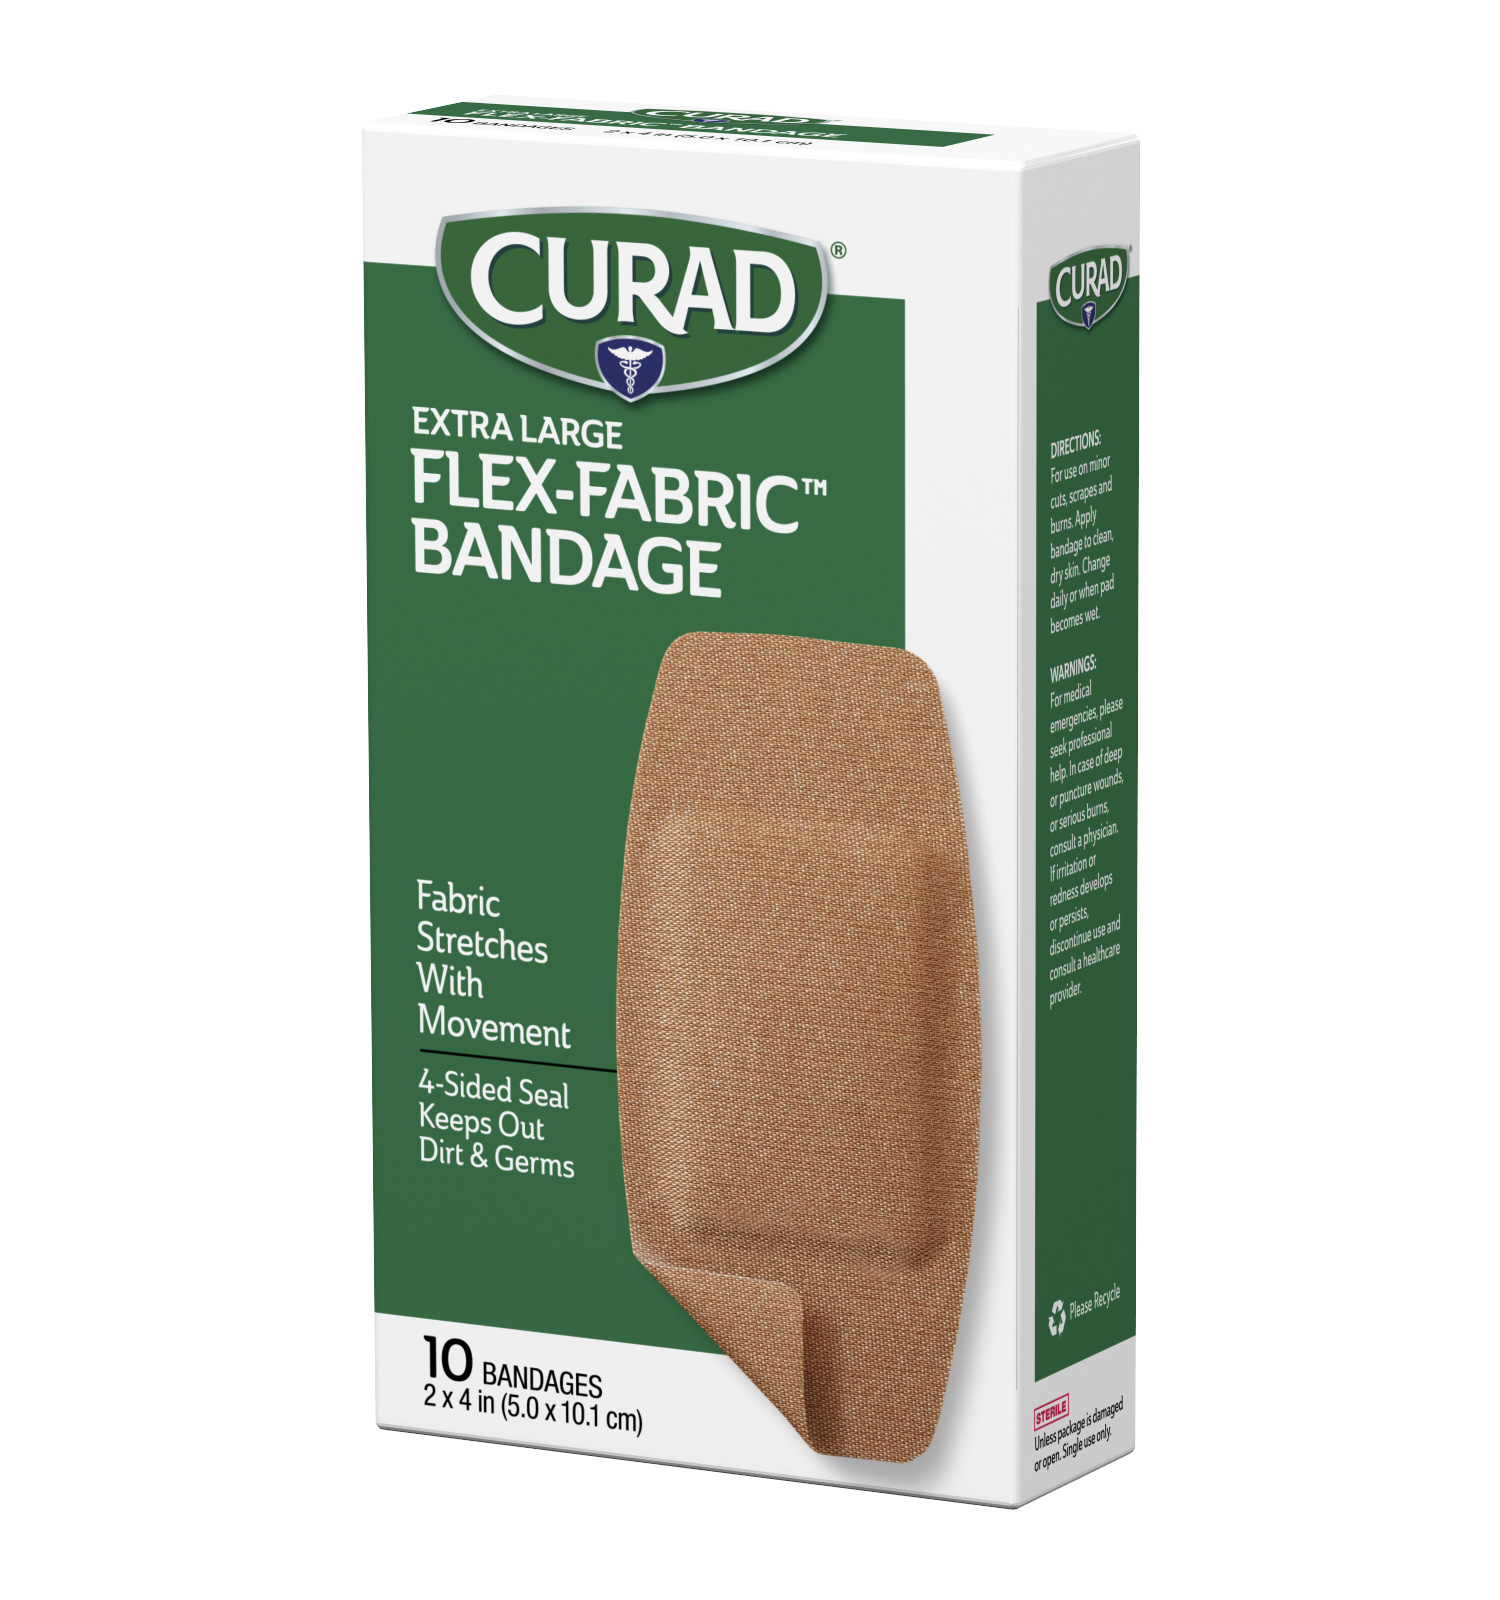 Plaster Bandages (All sizes: Rolls, Boxes, Cases) – brickintheyard